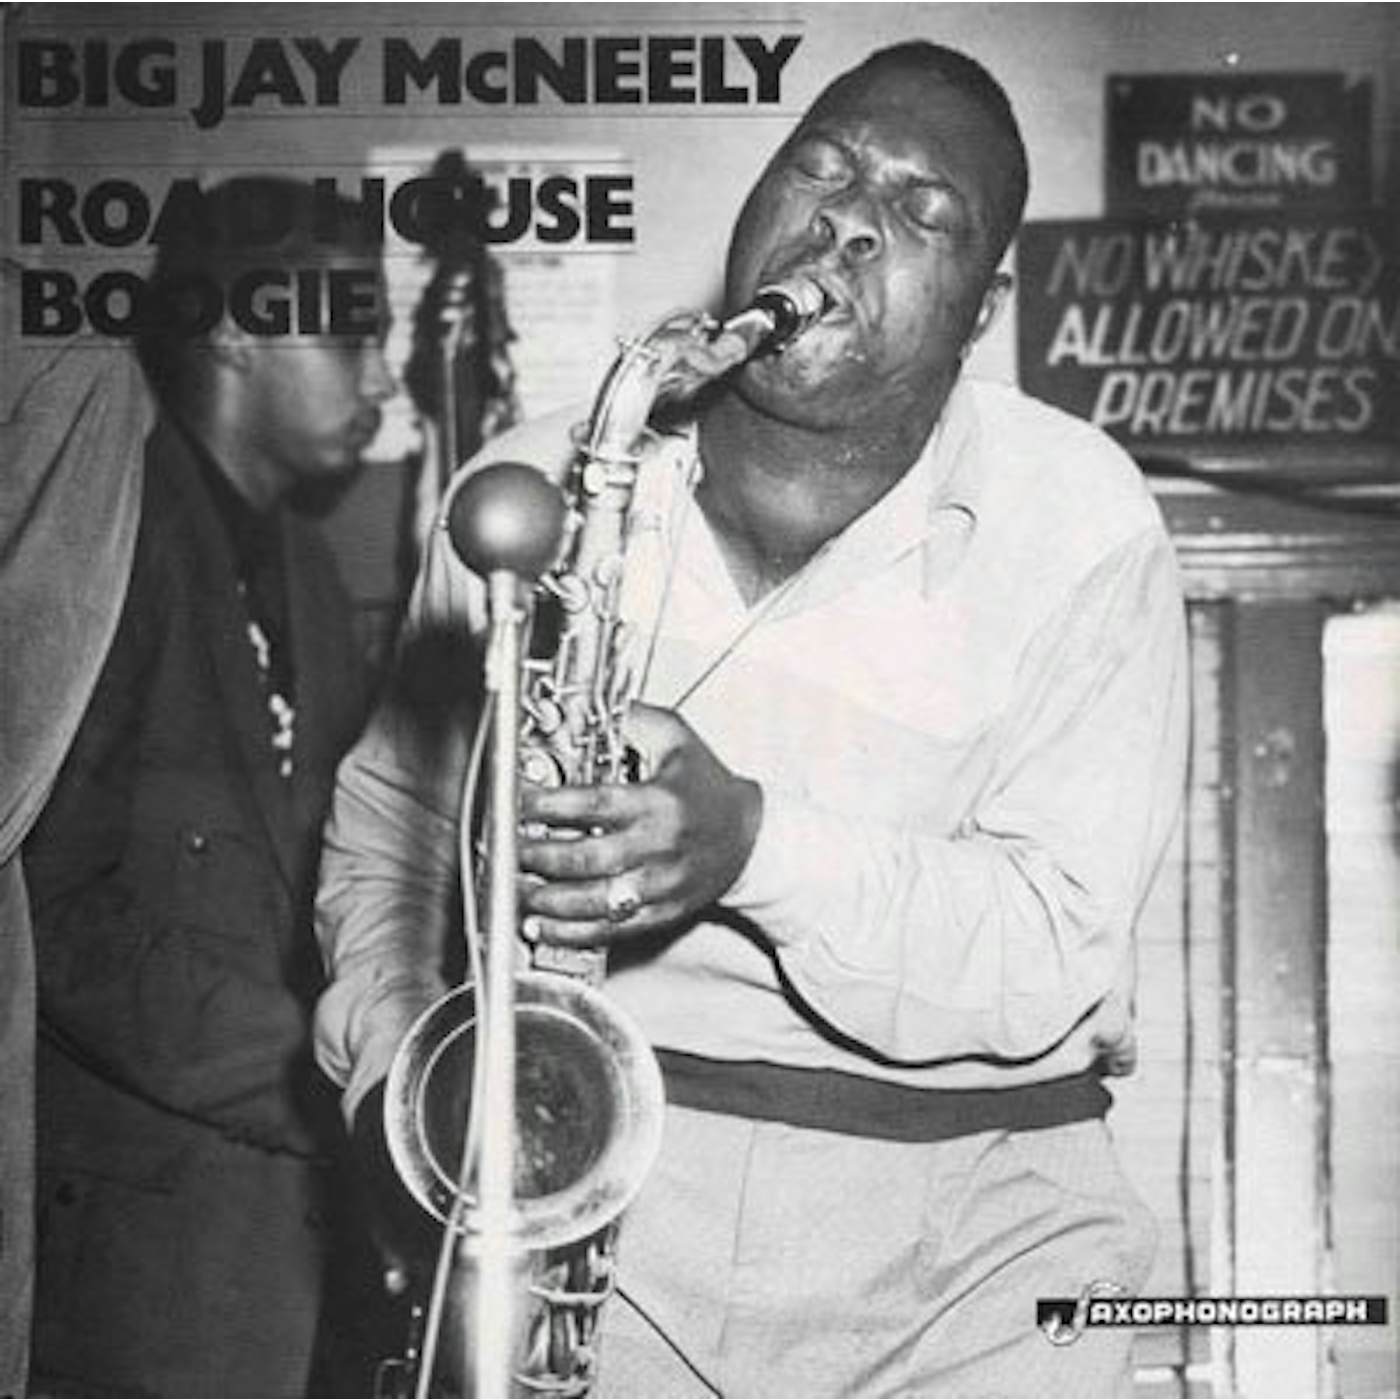 Big Jay McNeely ROADHOUSE BOOGIE L.A. & CHICAGO Vinyl Record